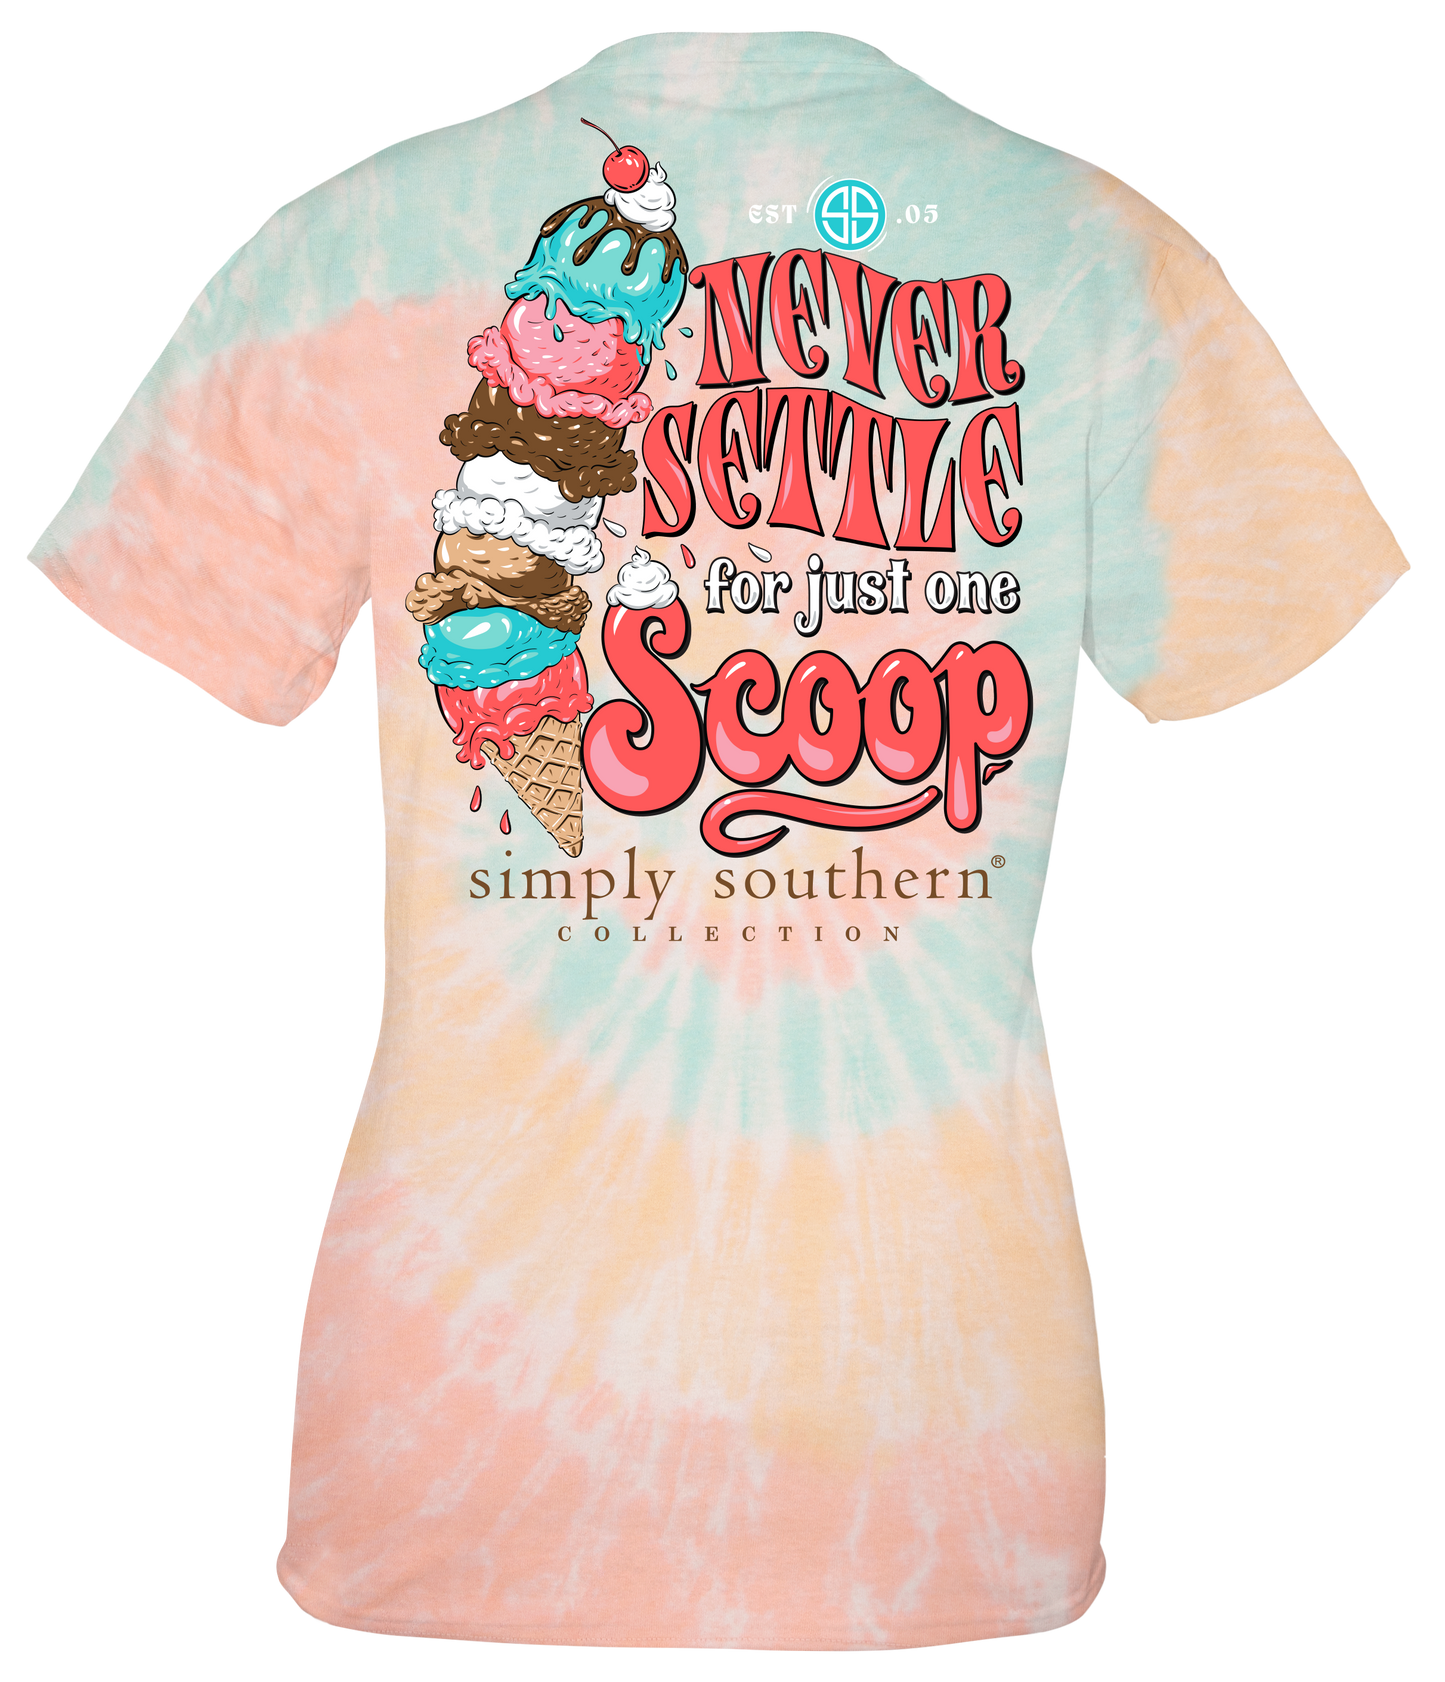 "Never Settle for Just One Scoop" Tie Dye Shirt